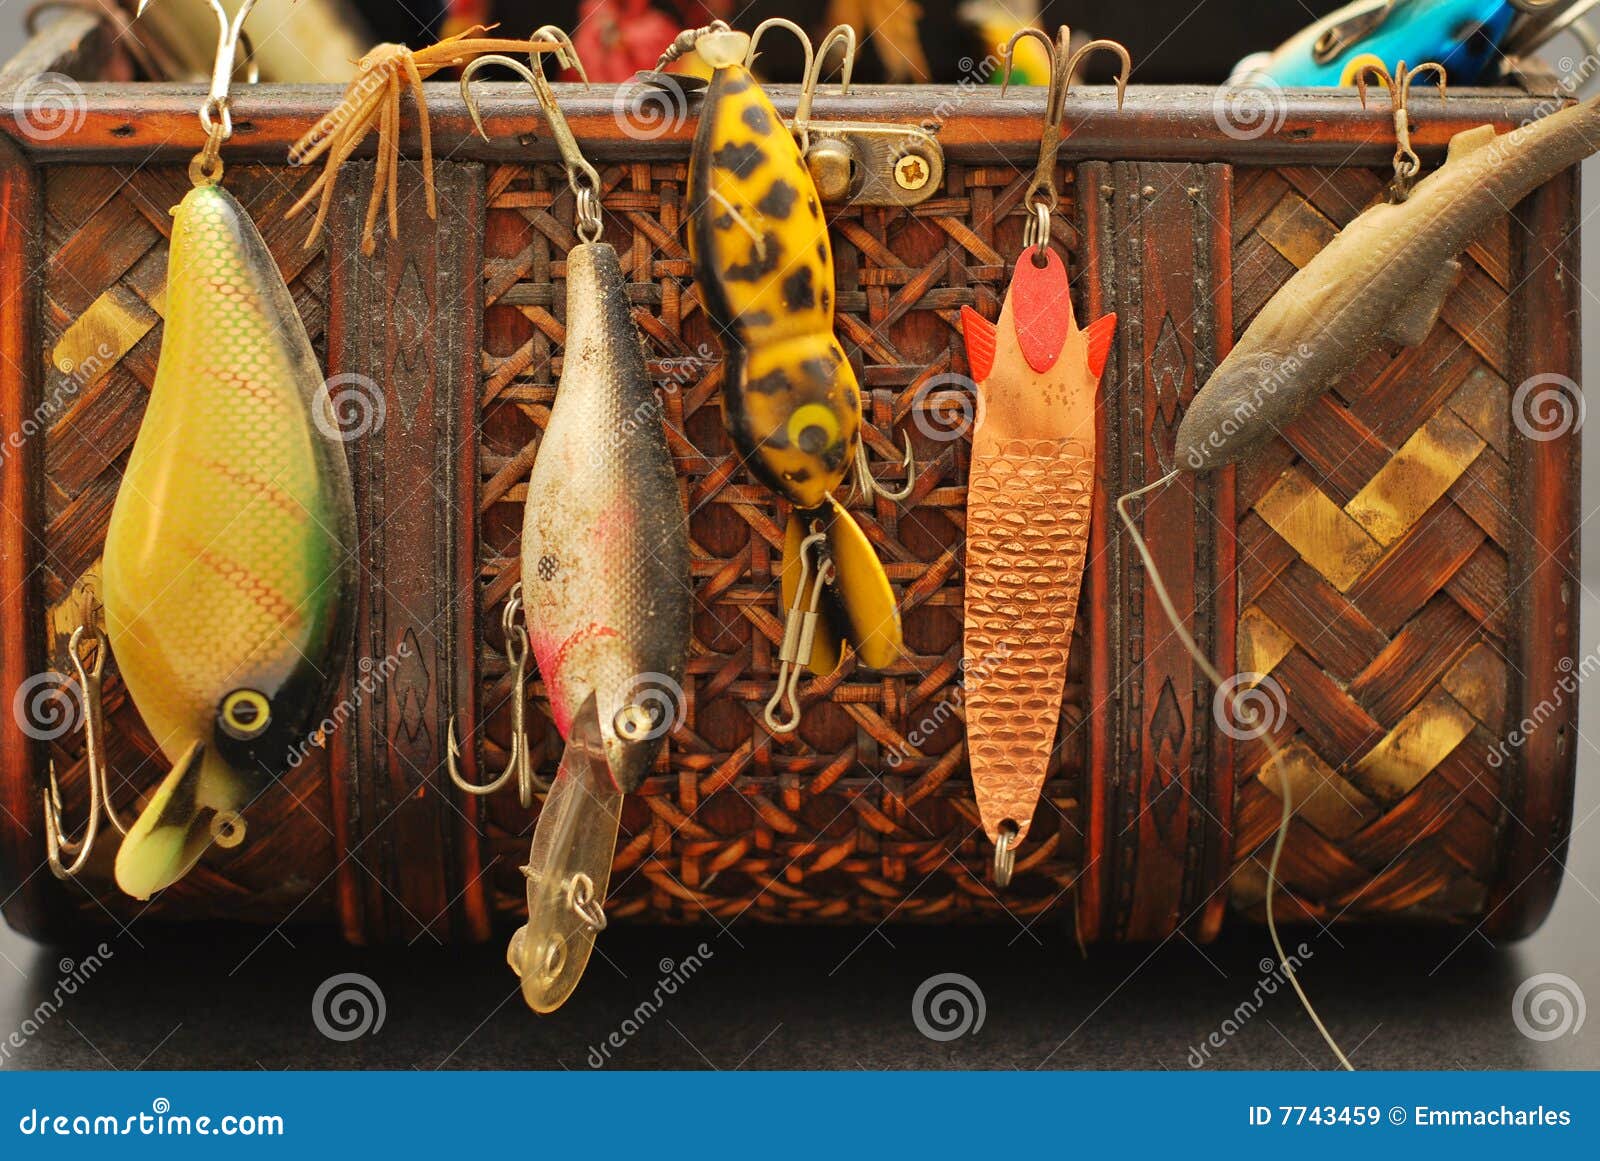 Catch the Big Fish with the Best Lure Stock Image - Image of lure